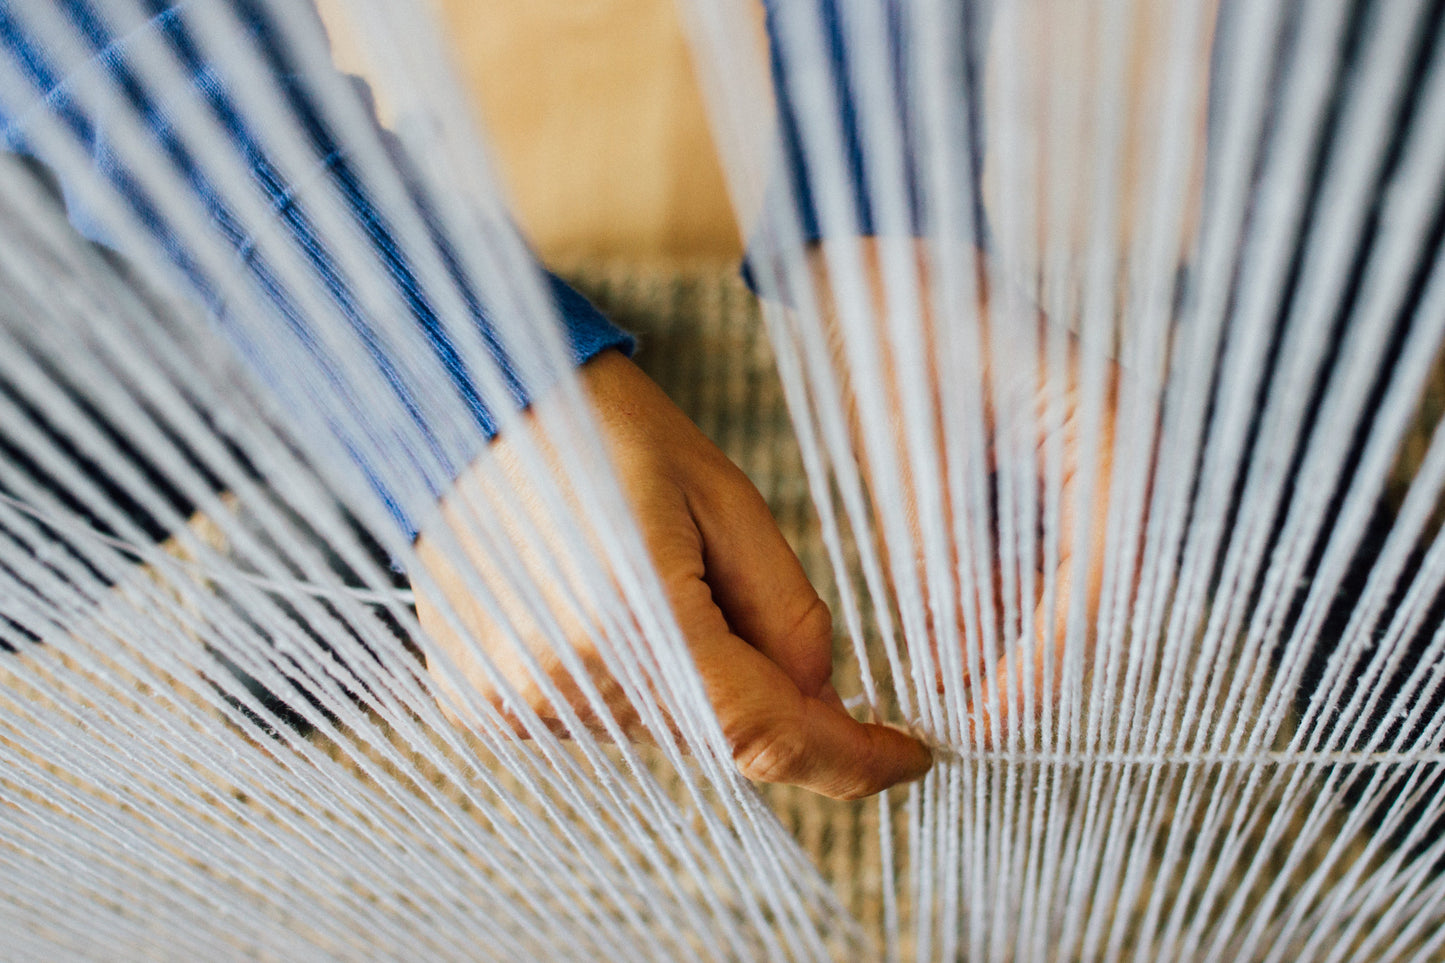 26 and 27 March 2022 - Tapestry vs Shaft loom weaving workshop - PRESENTIAL